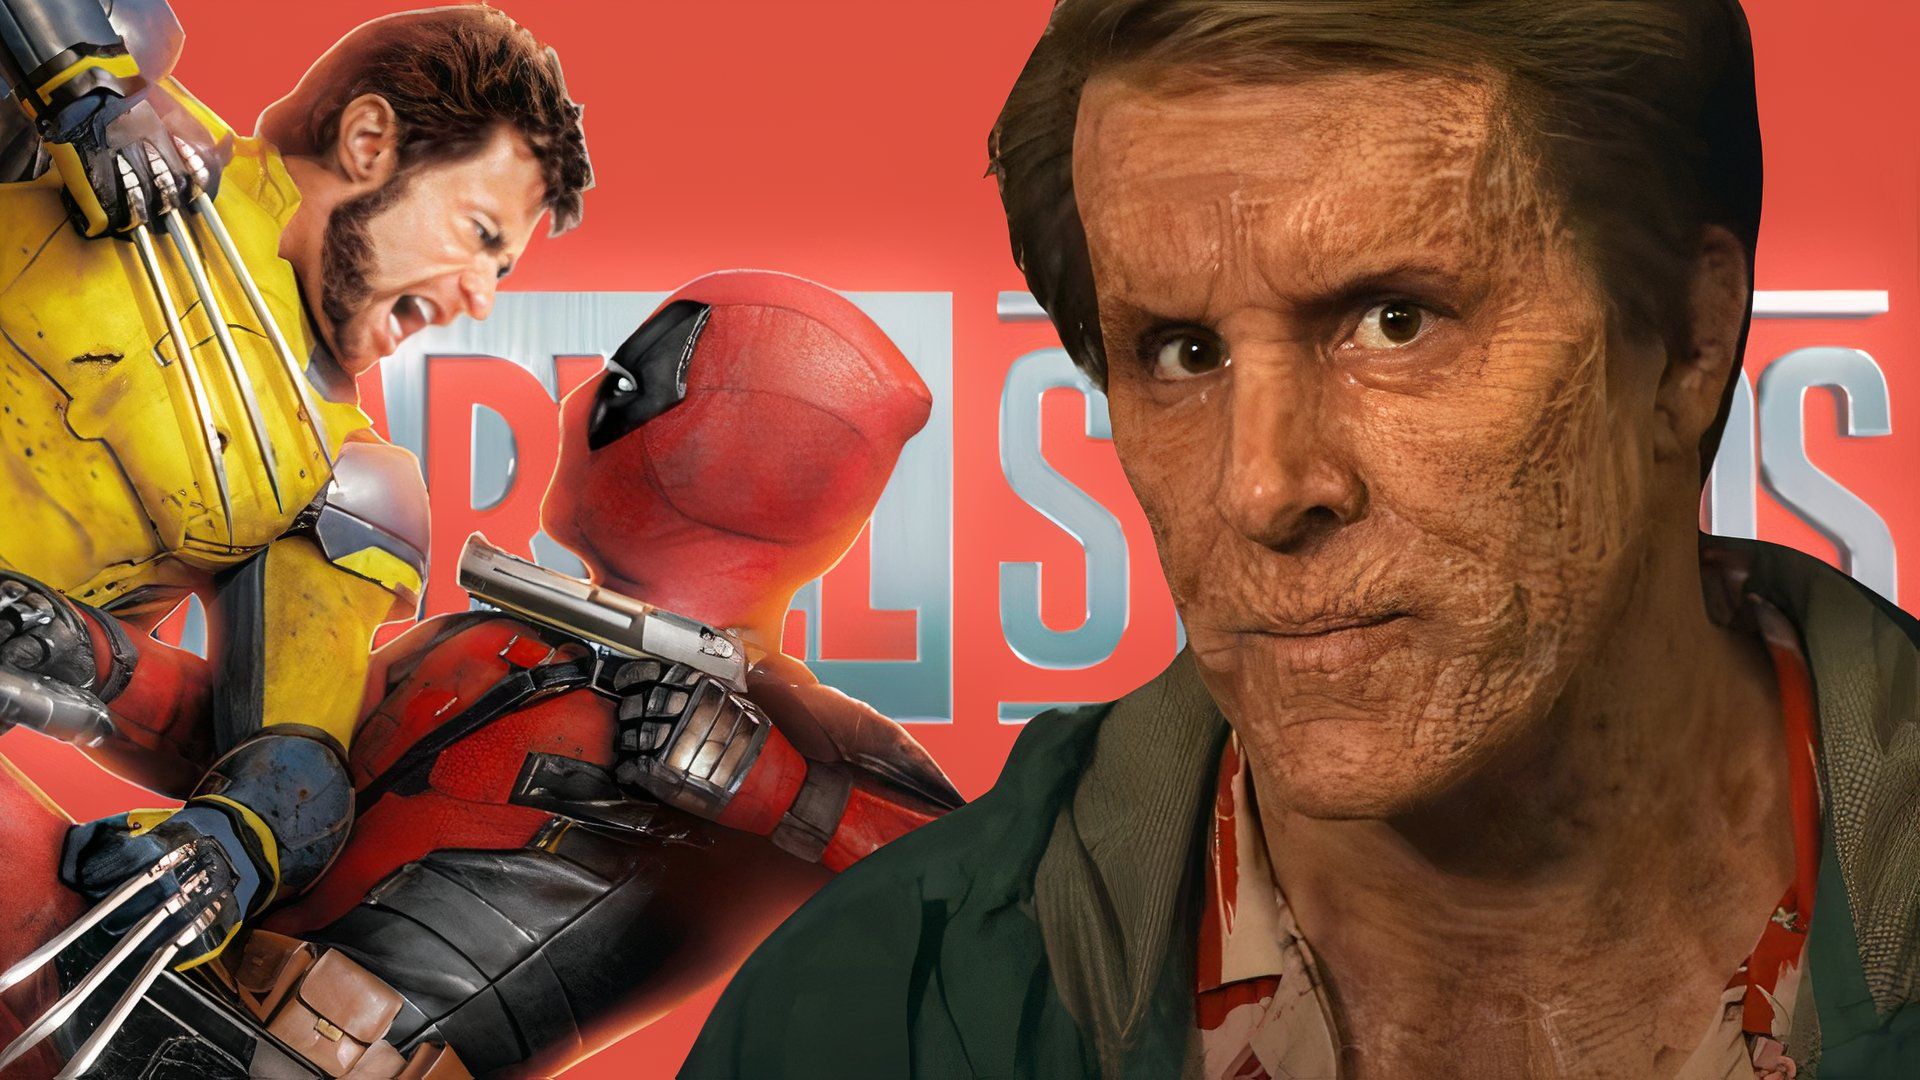 Deadpool & Wolverine Director Reveals Certain Things Could Not Be in the Movie Despite R Rating